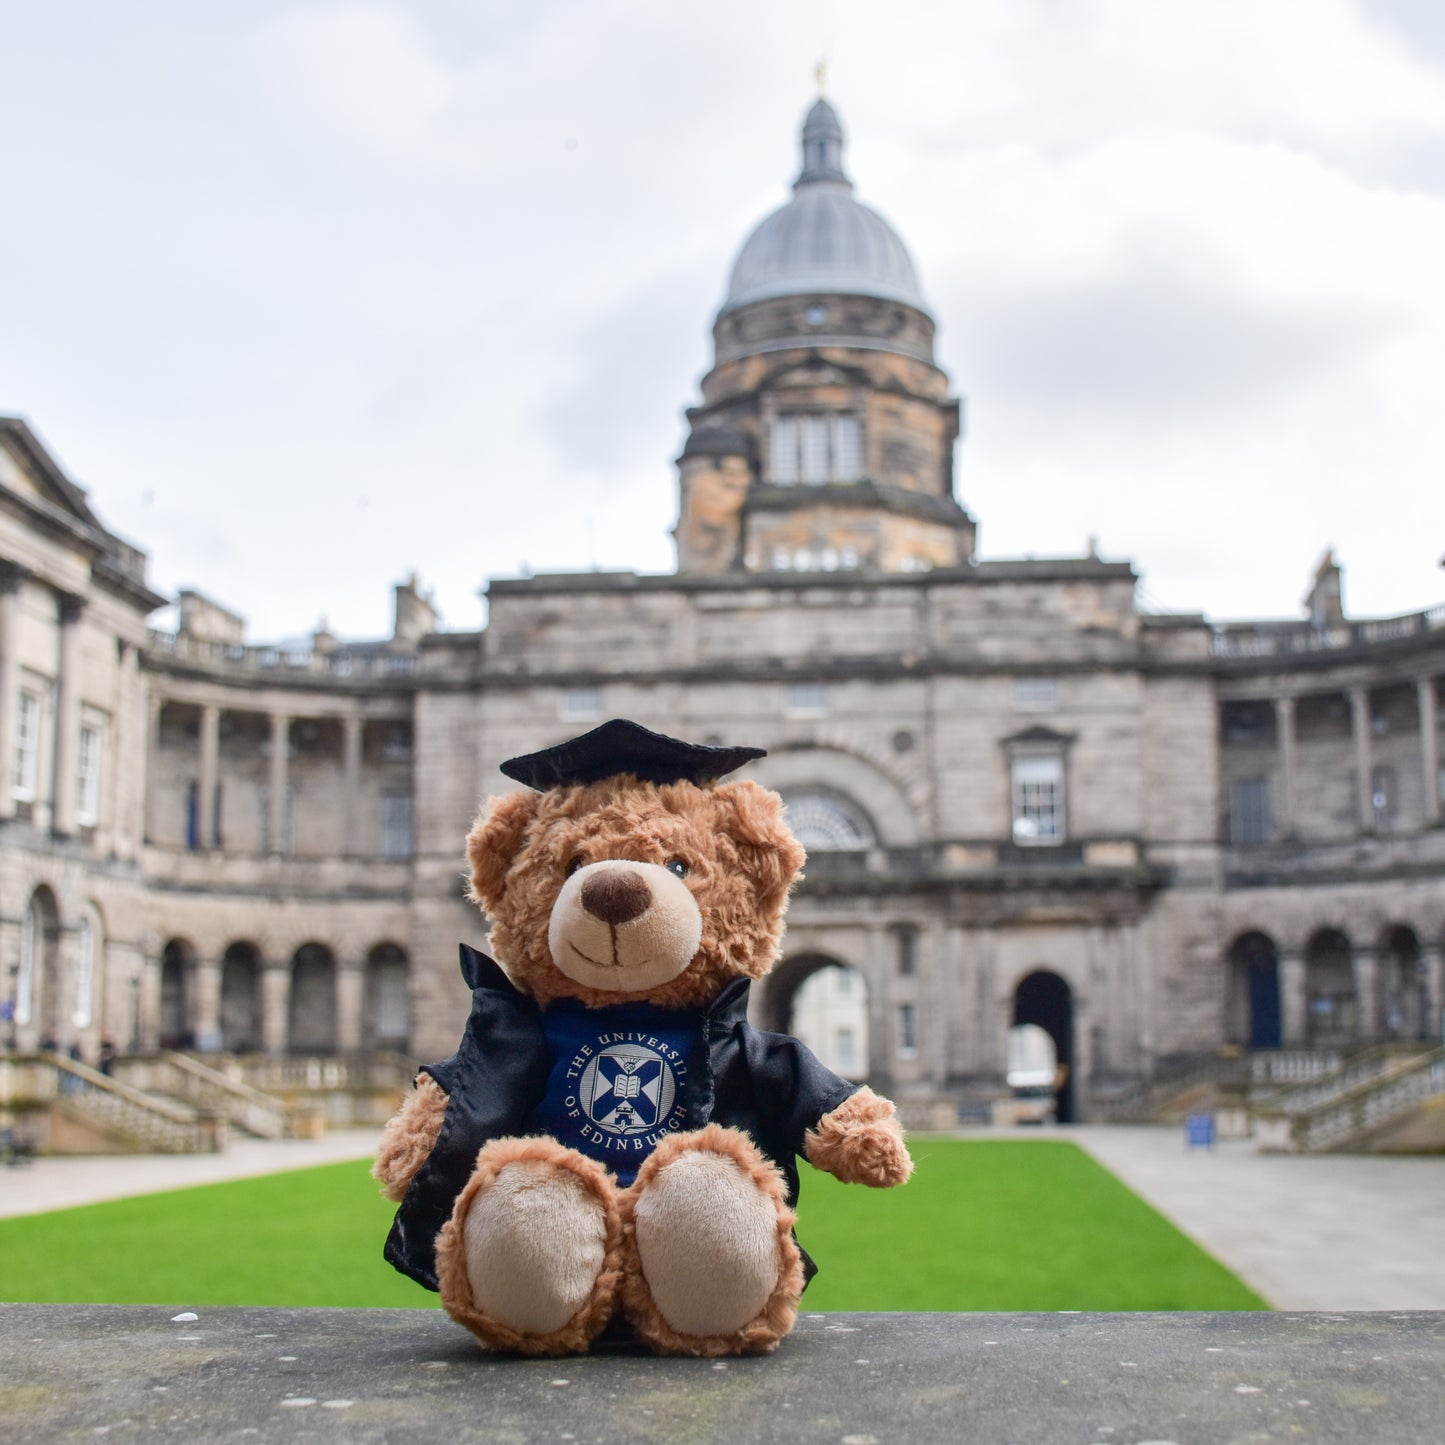 Edinbear Recycled Plush sitting in front of the Old College quad and Golden Boy statute.